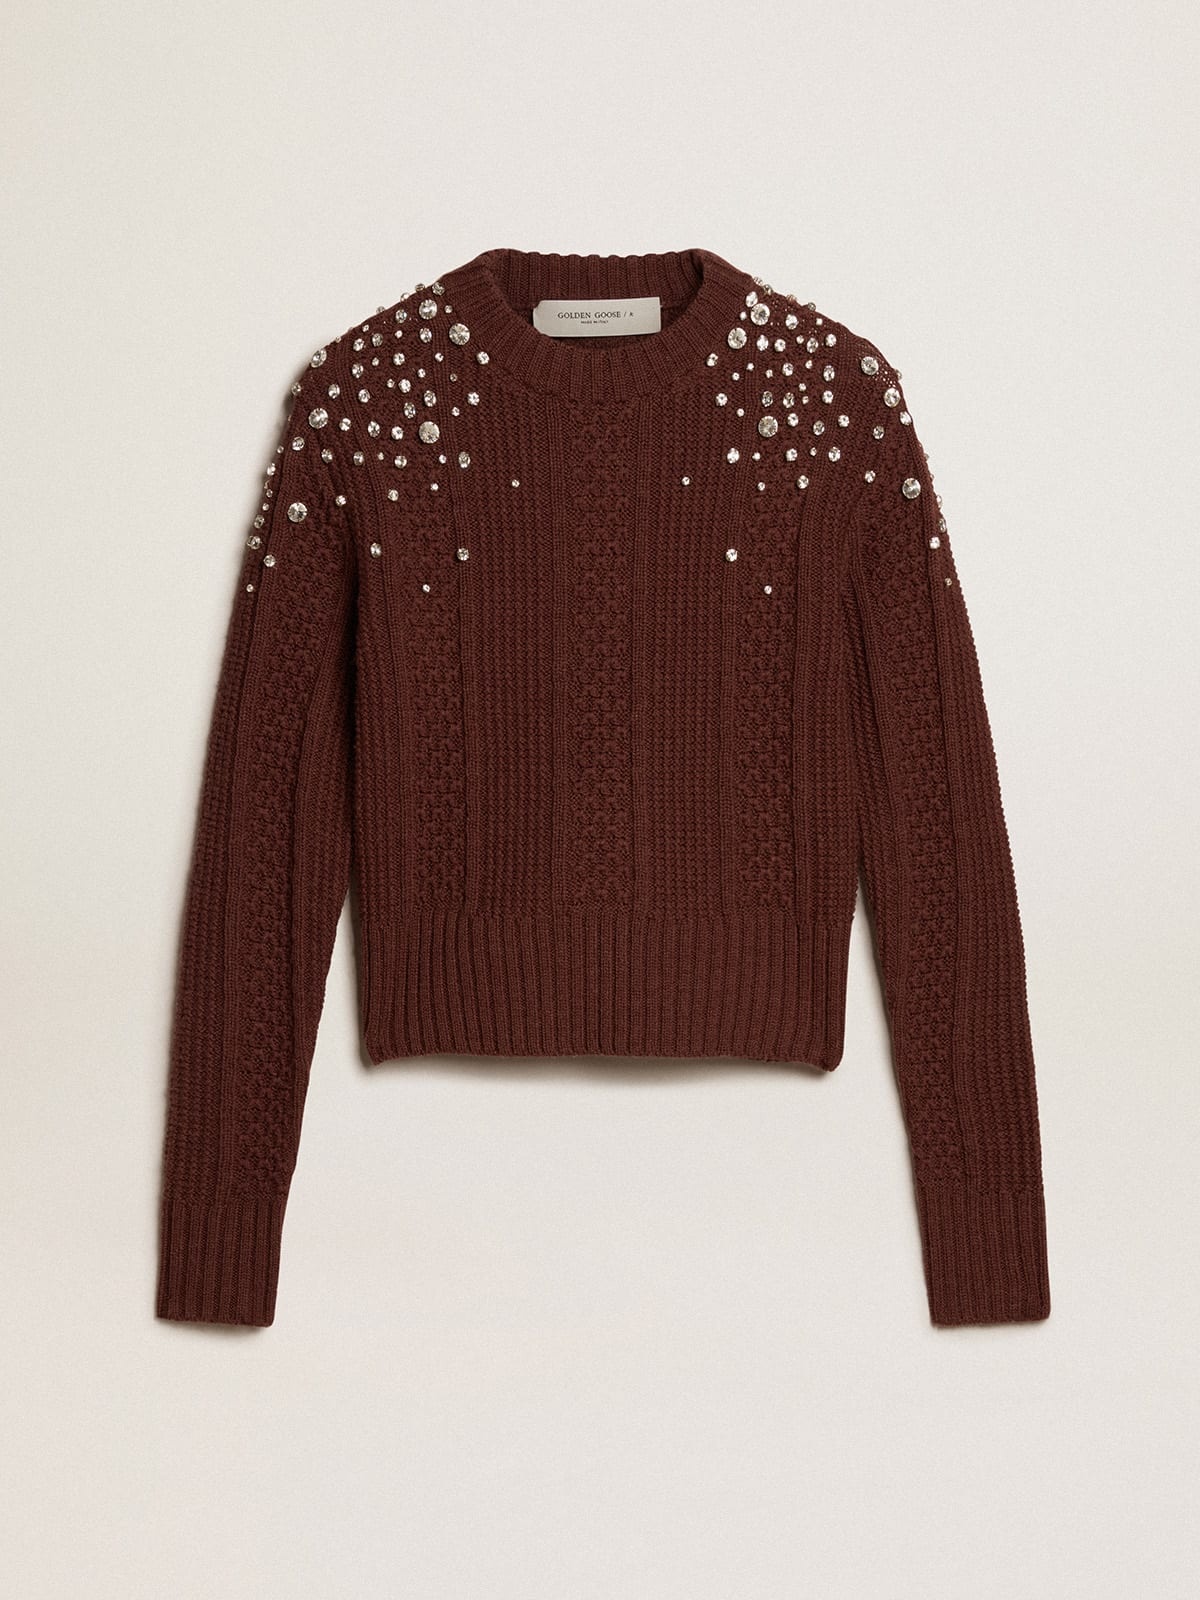 Cropped sweater in burgundy wool with crystals - 1